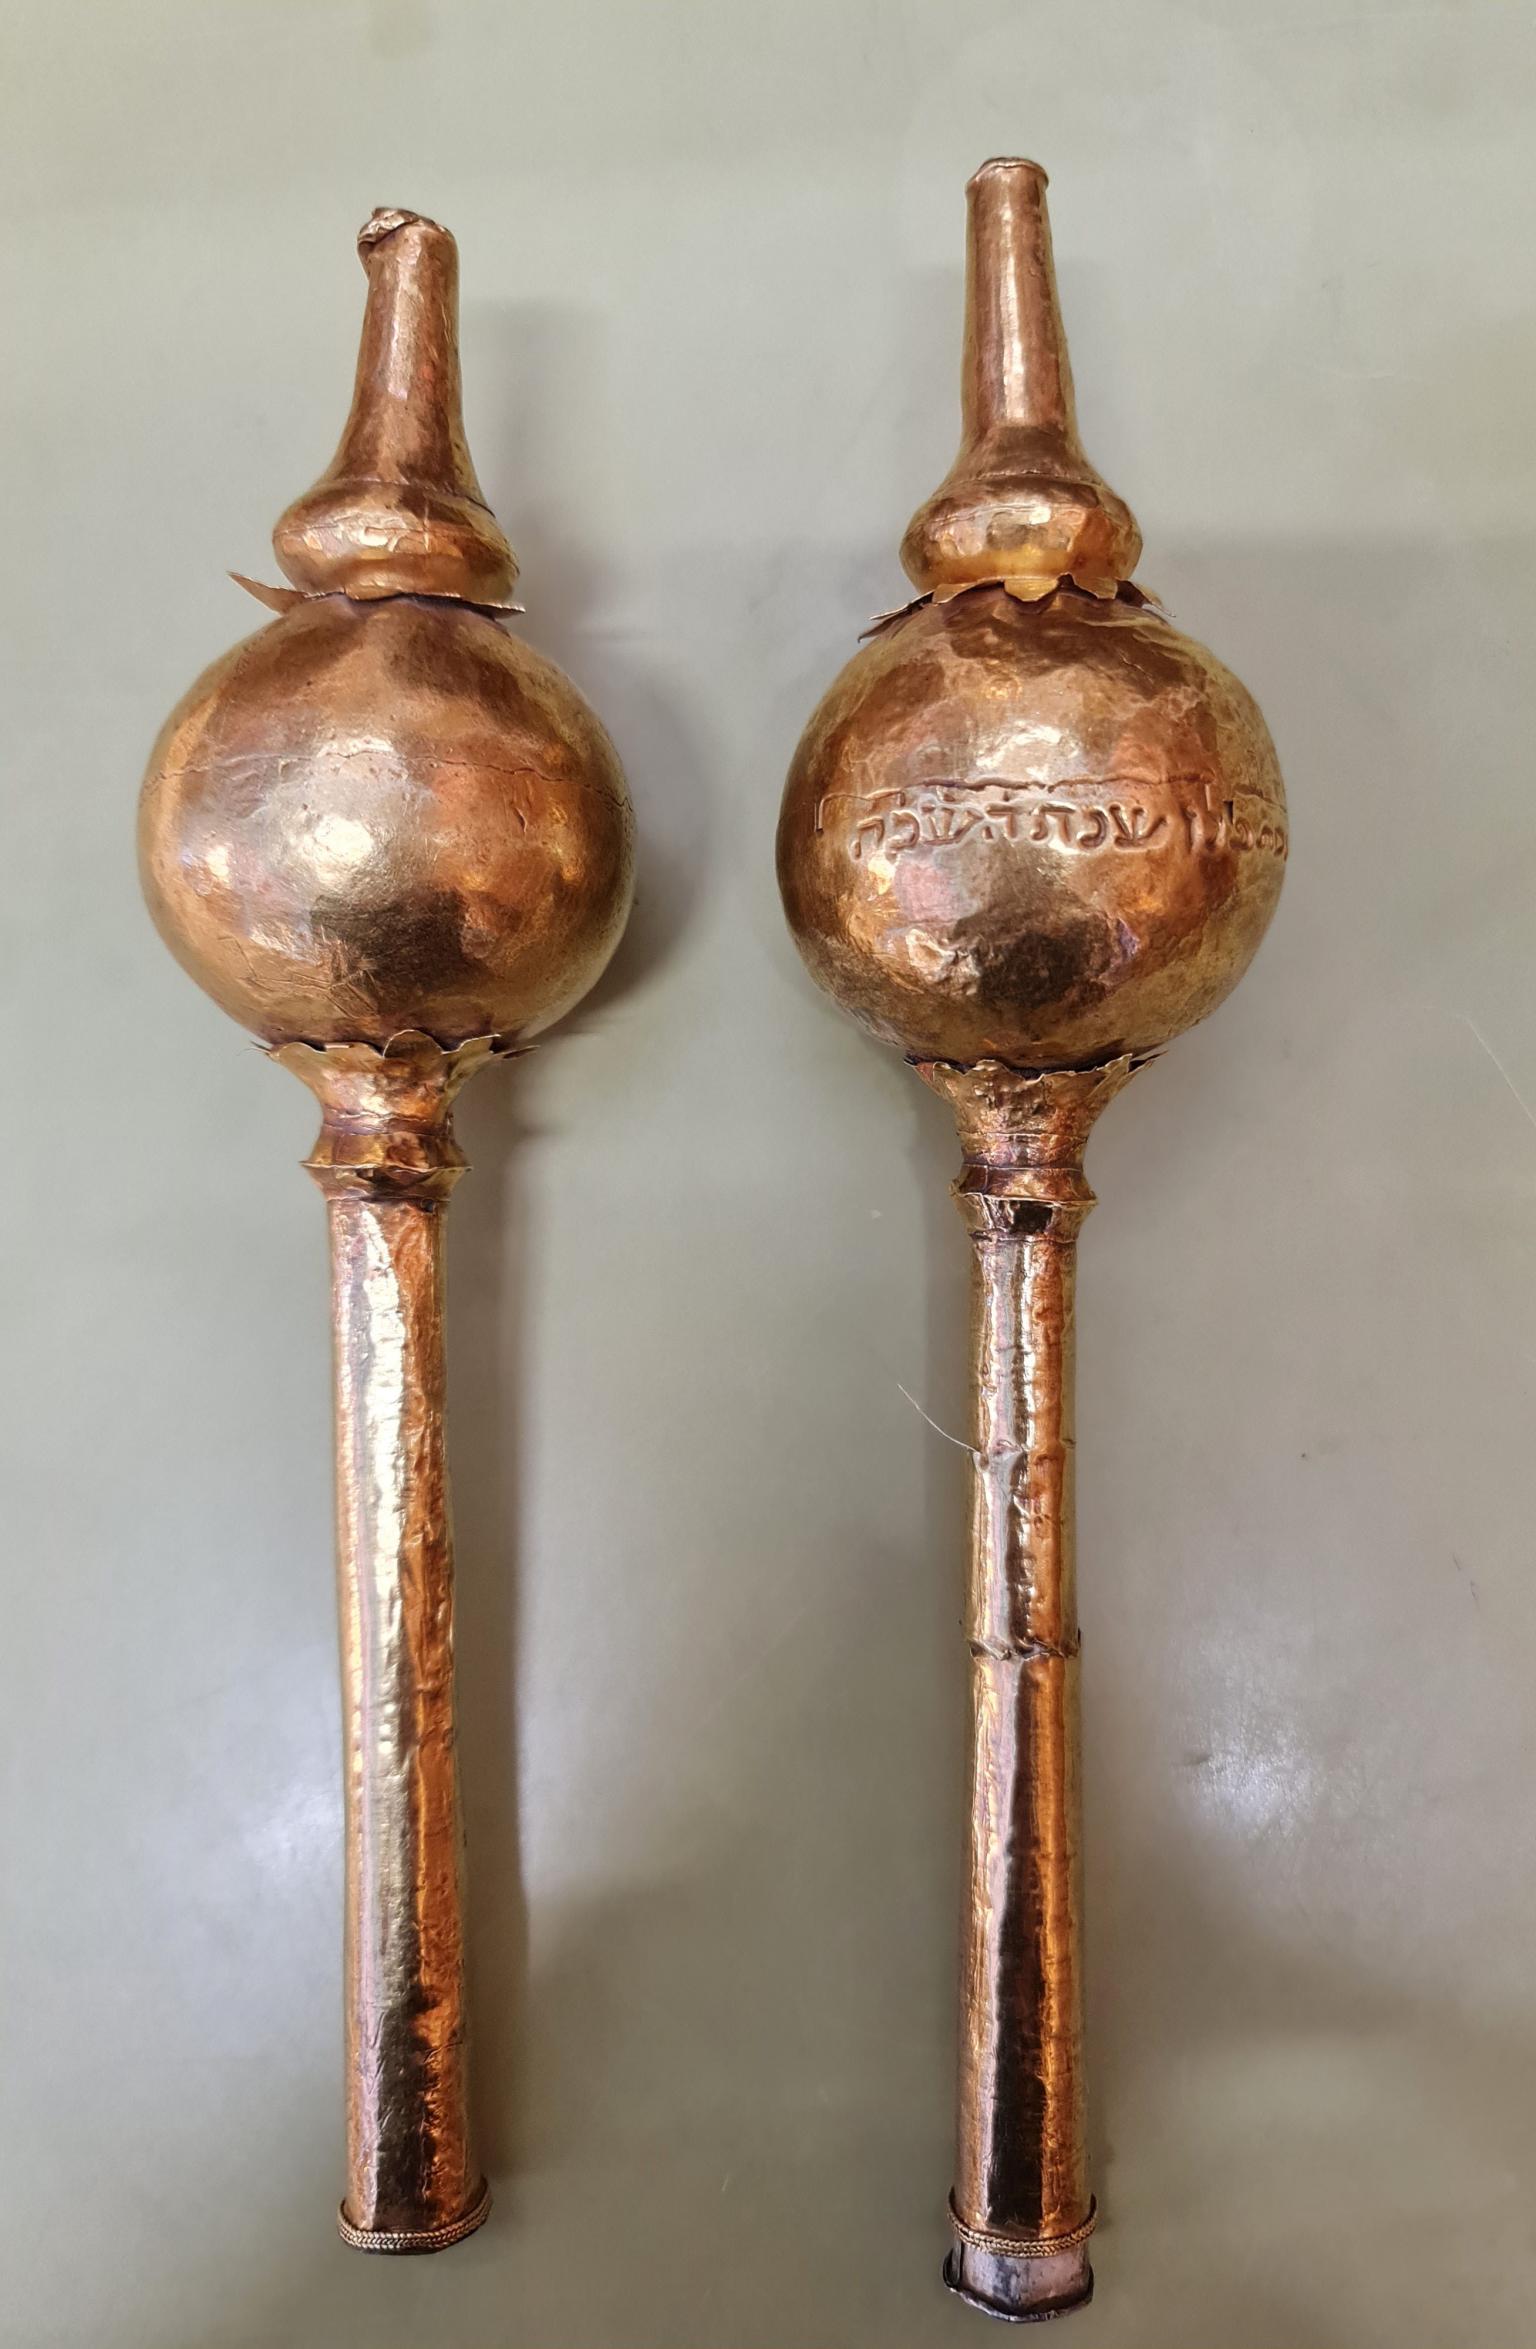 Two finials with Hebrew inscription on one. 